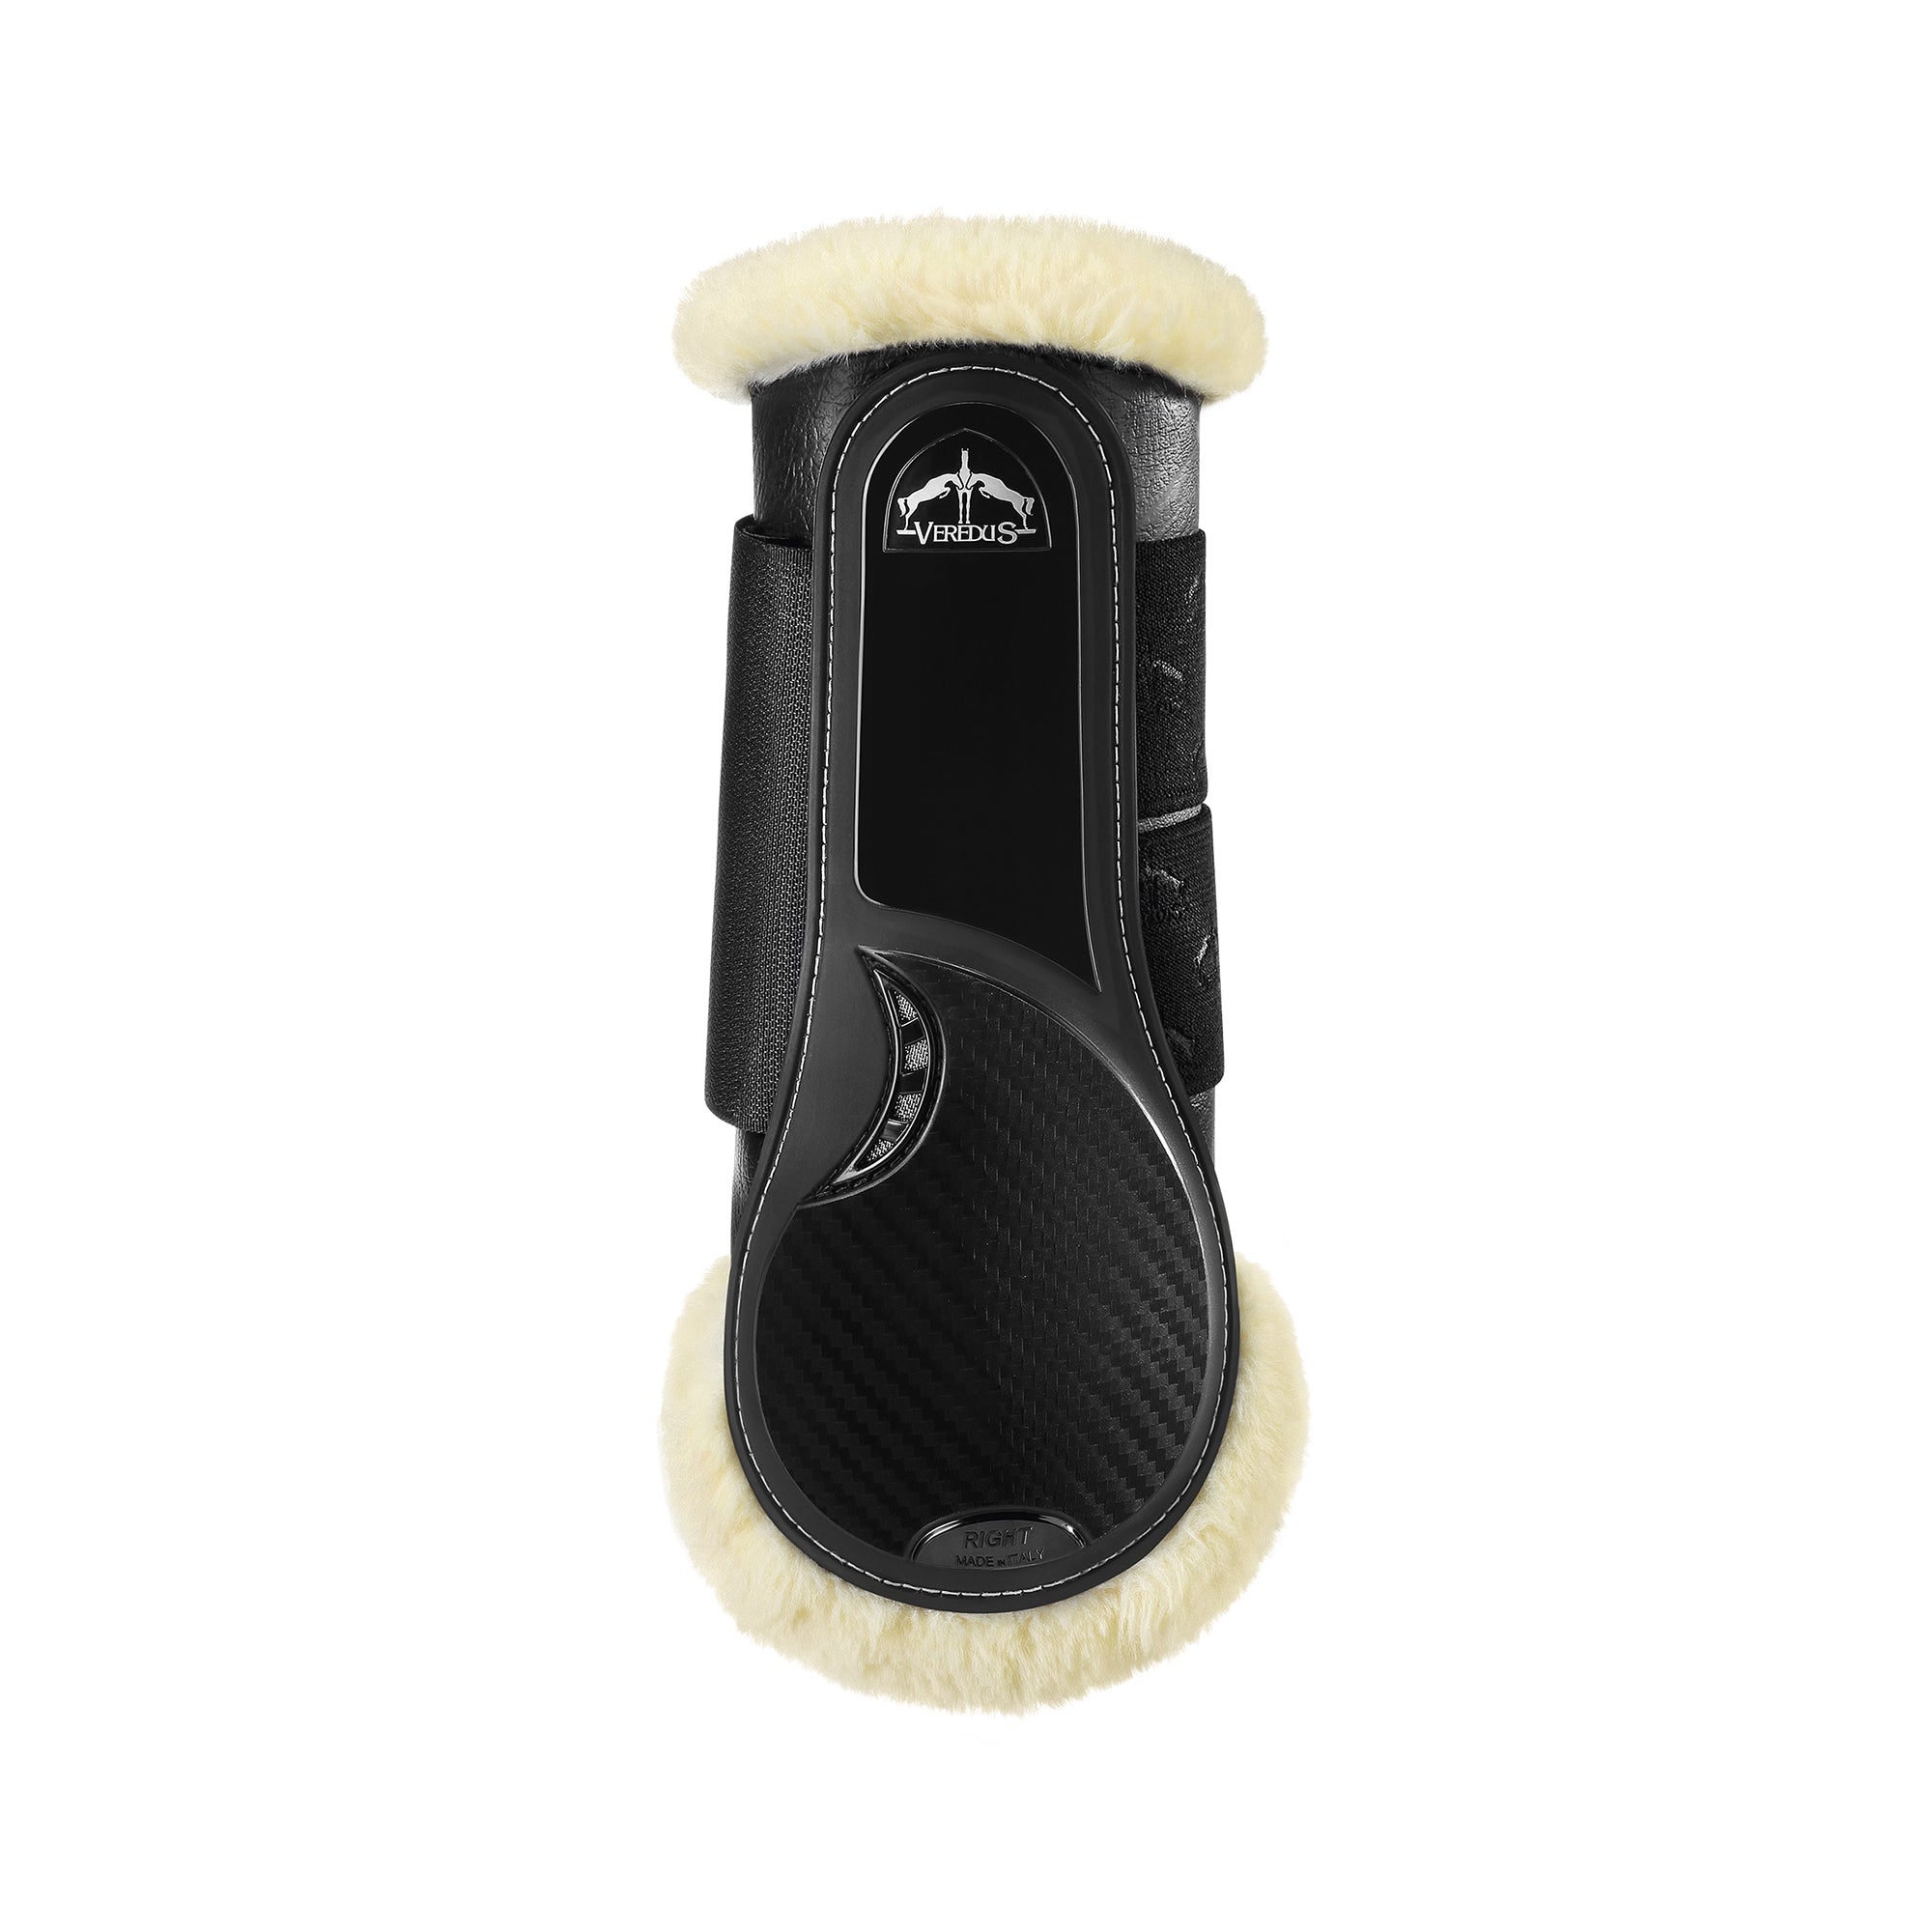 product shot image of the TRC Vento Save The Sheep Tendon Boots - Black